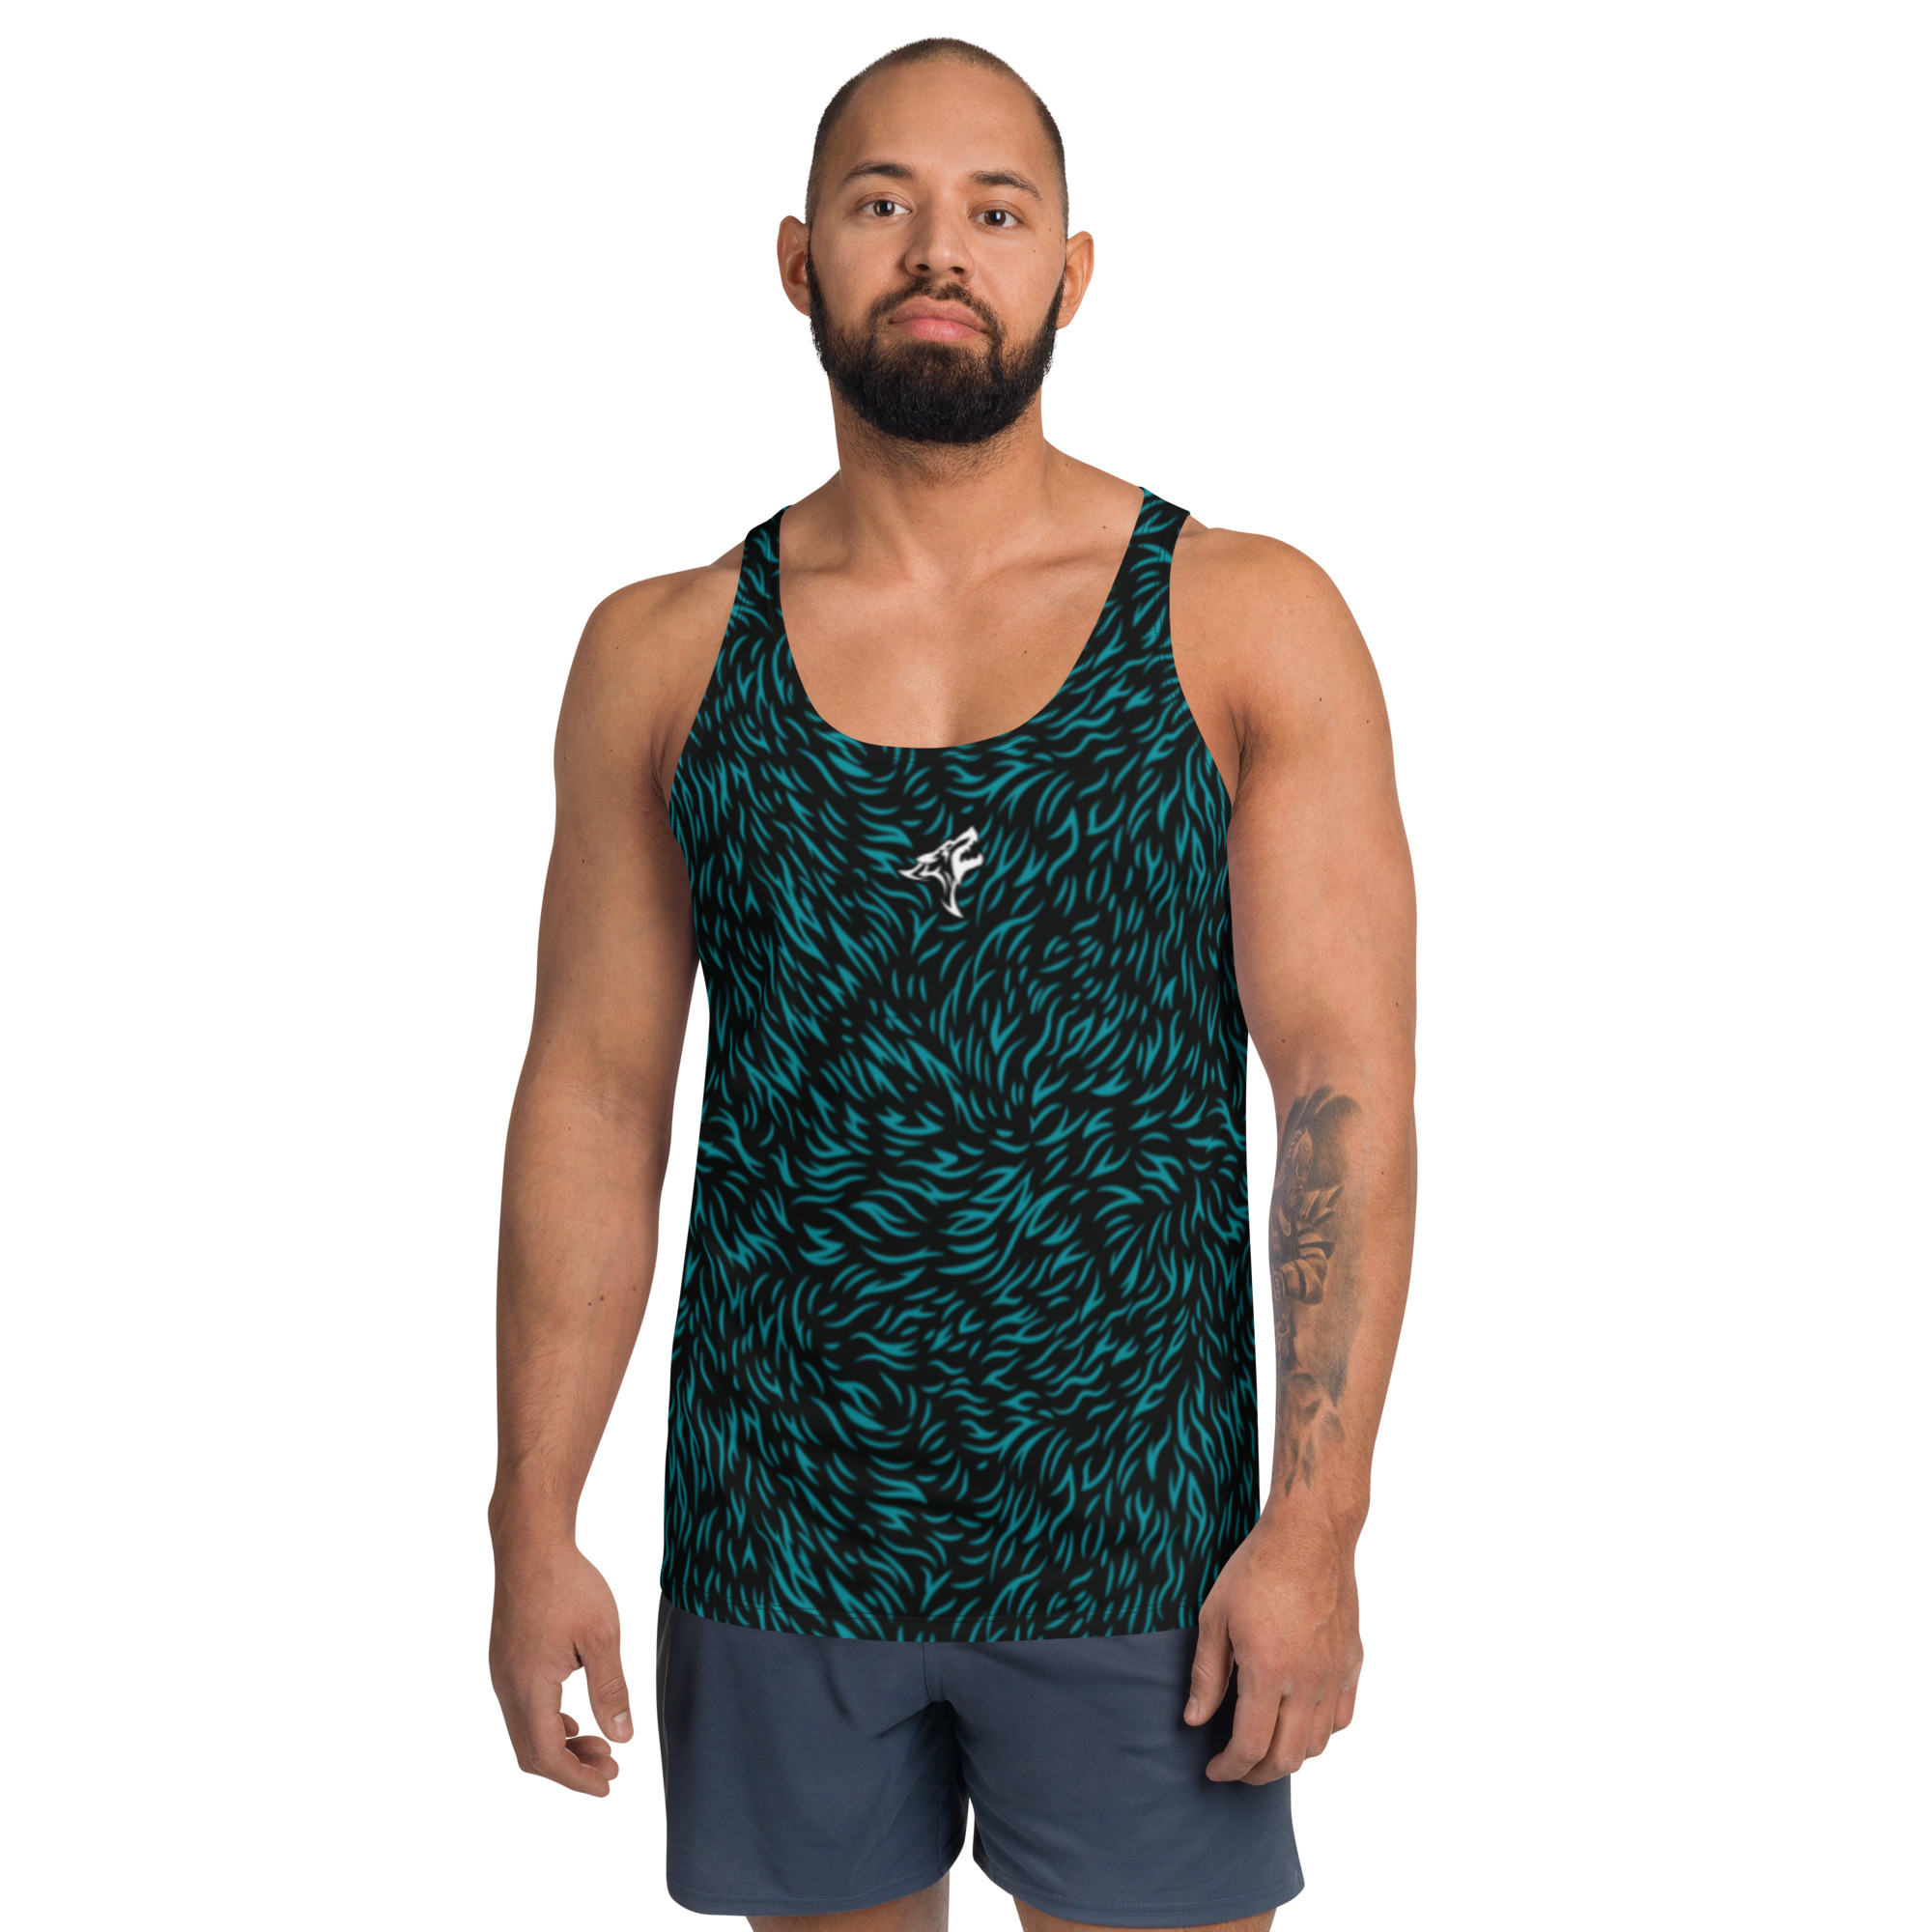 all-over-print-mens-tank-top-white-front-62c6b9721b8ee.jpg